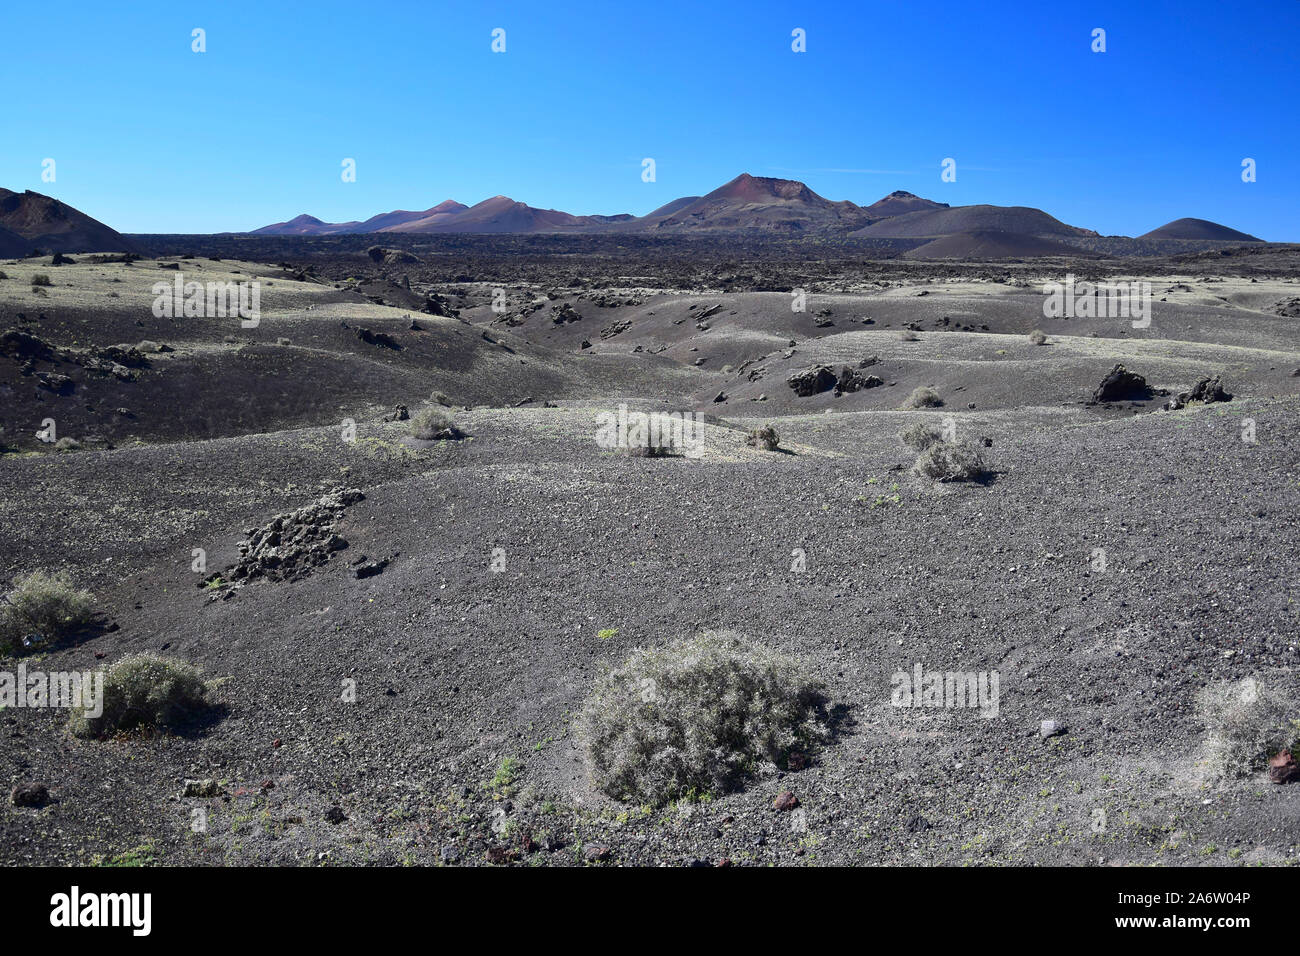 A barren landscape in Lanzarote with the volcanos of the Timanfaya national park in the back. Stock Photo